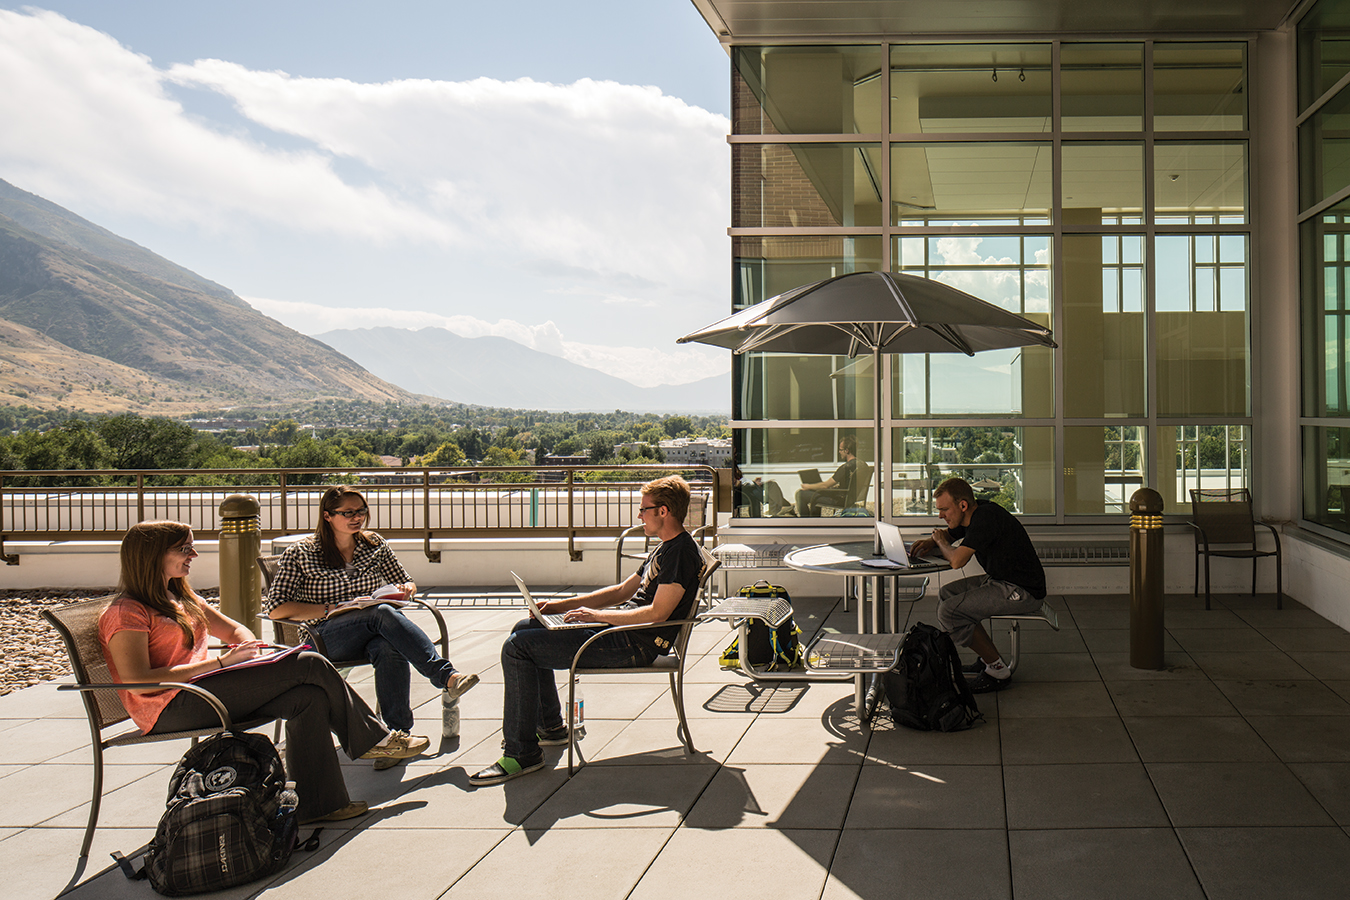 Warm days will find students outside on rooftop patios.